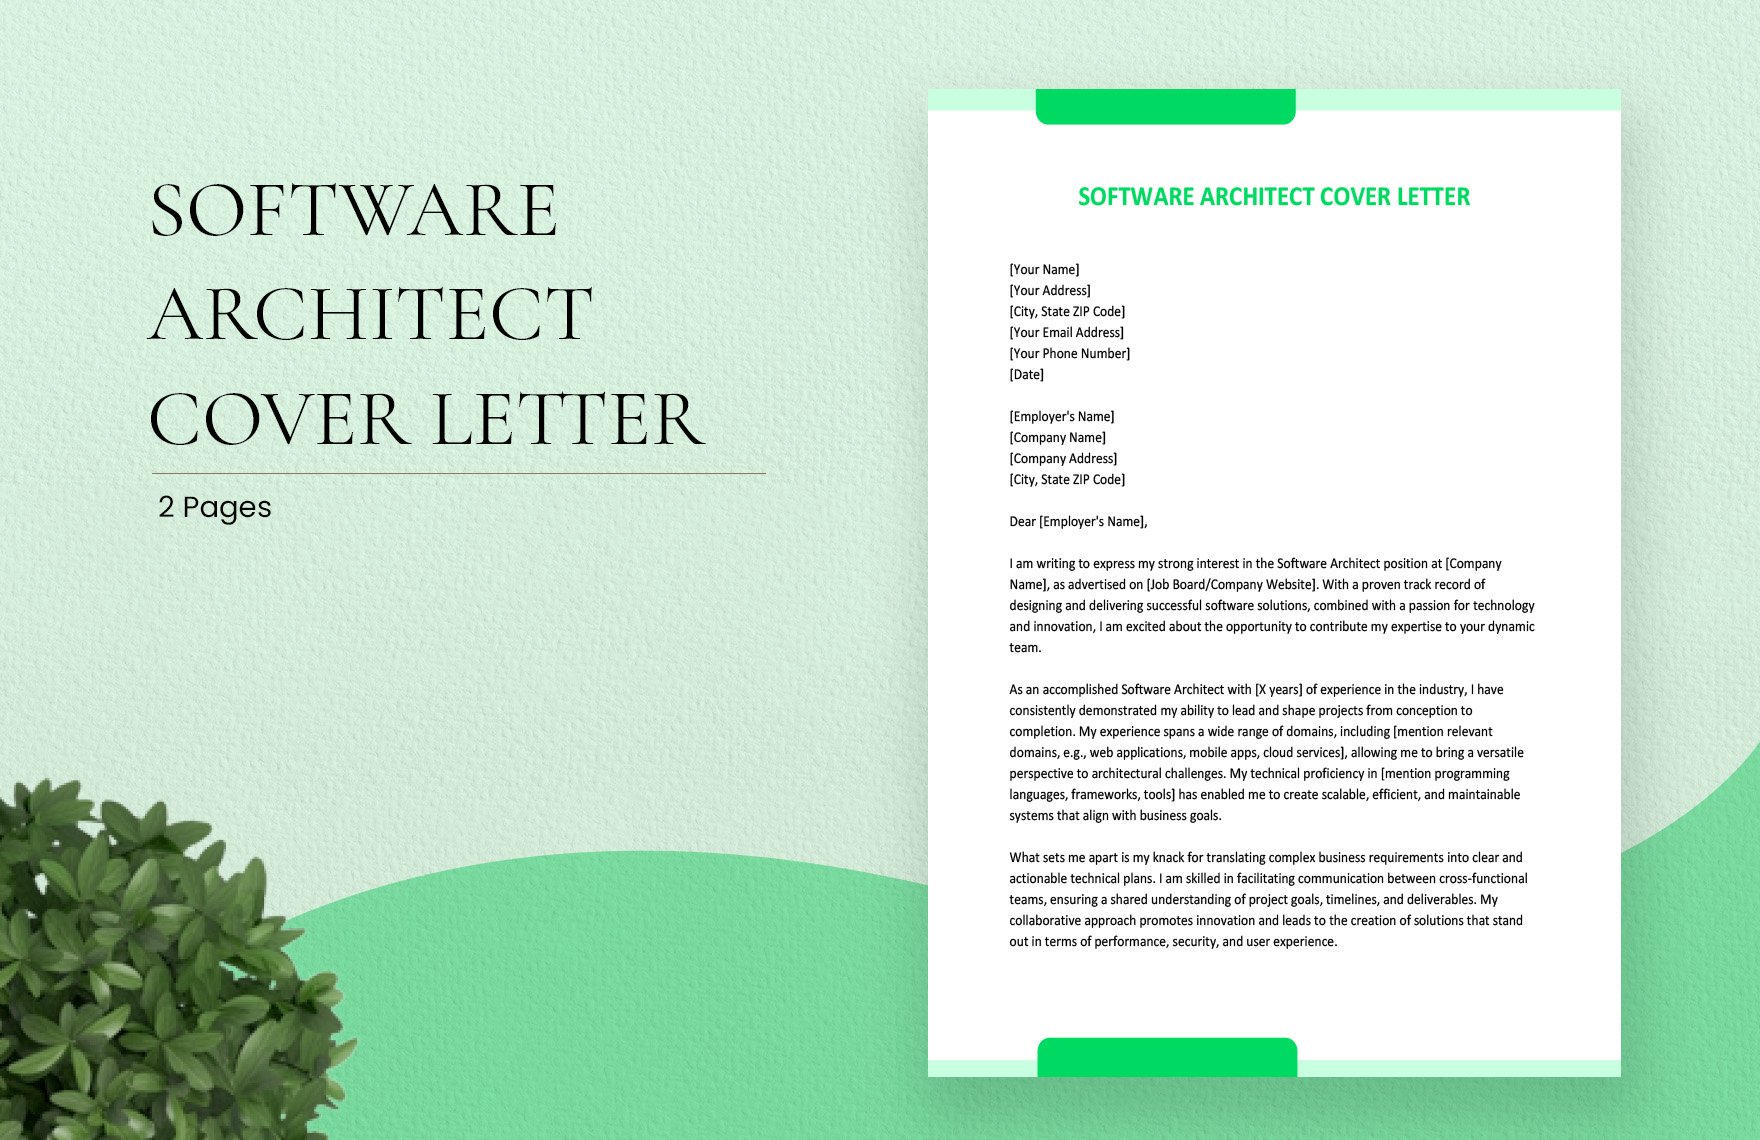 Software Architect Cover Letter in Word, Google Docs